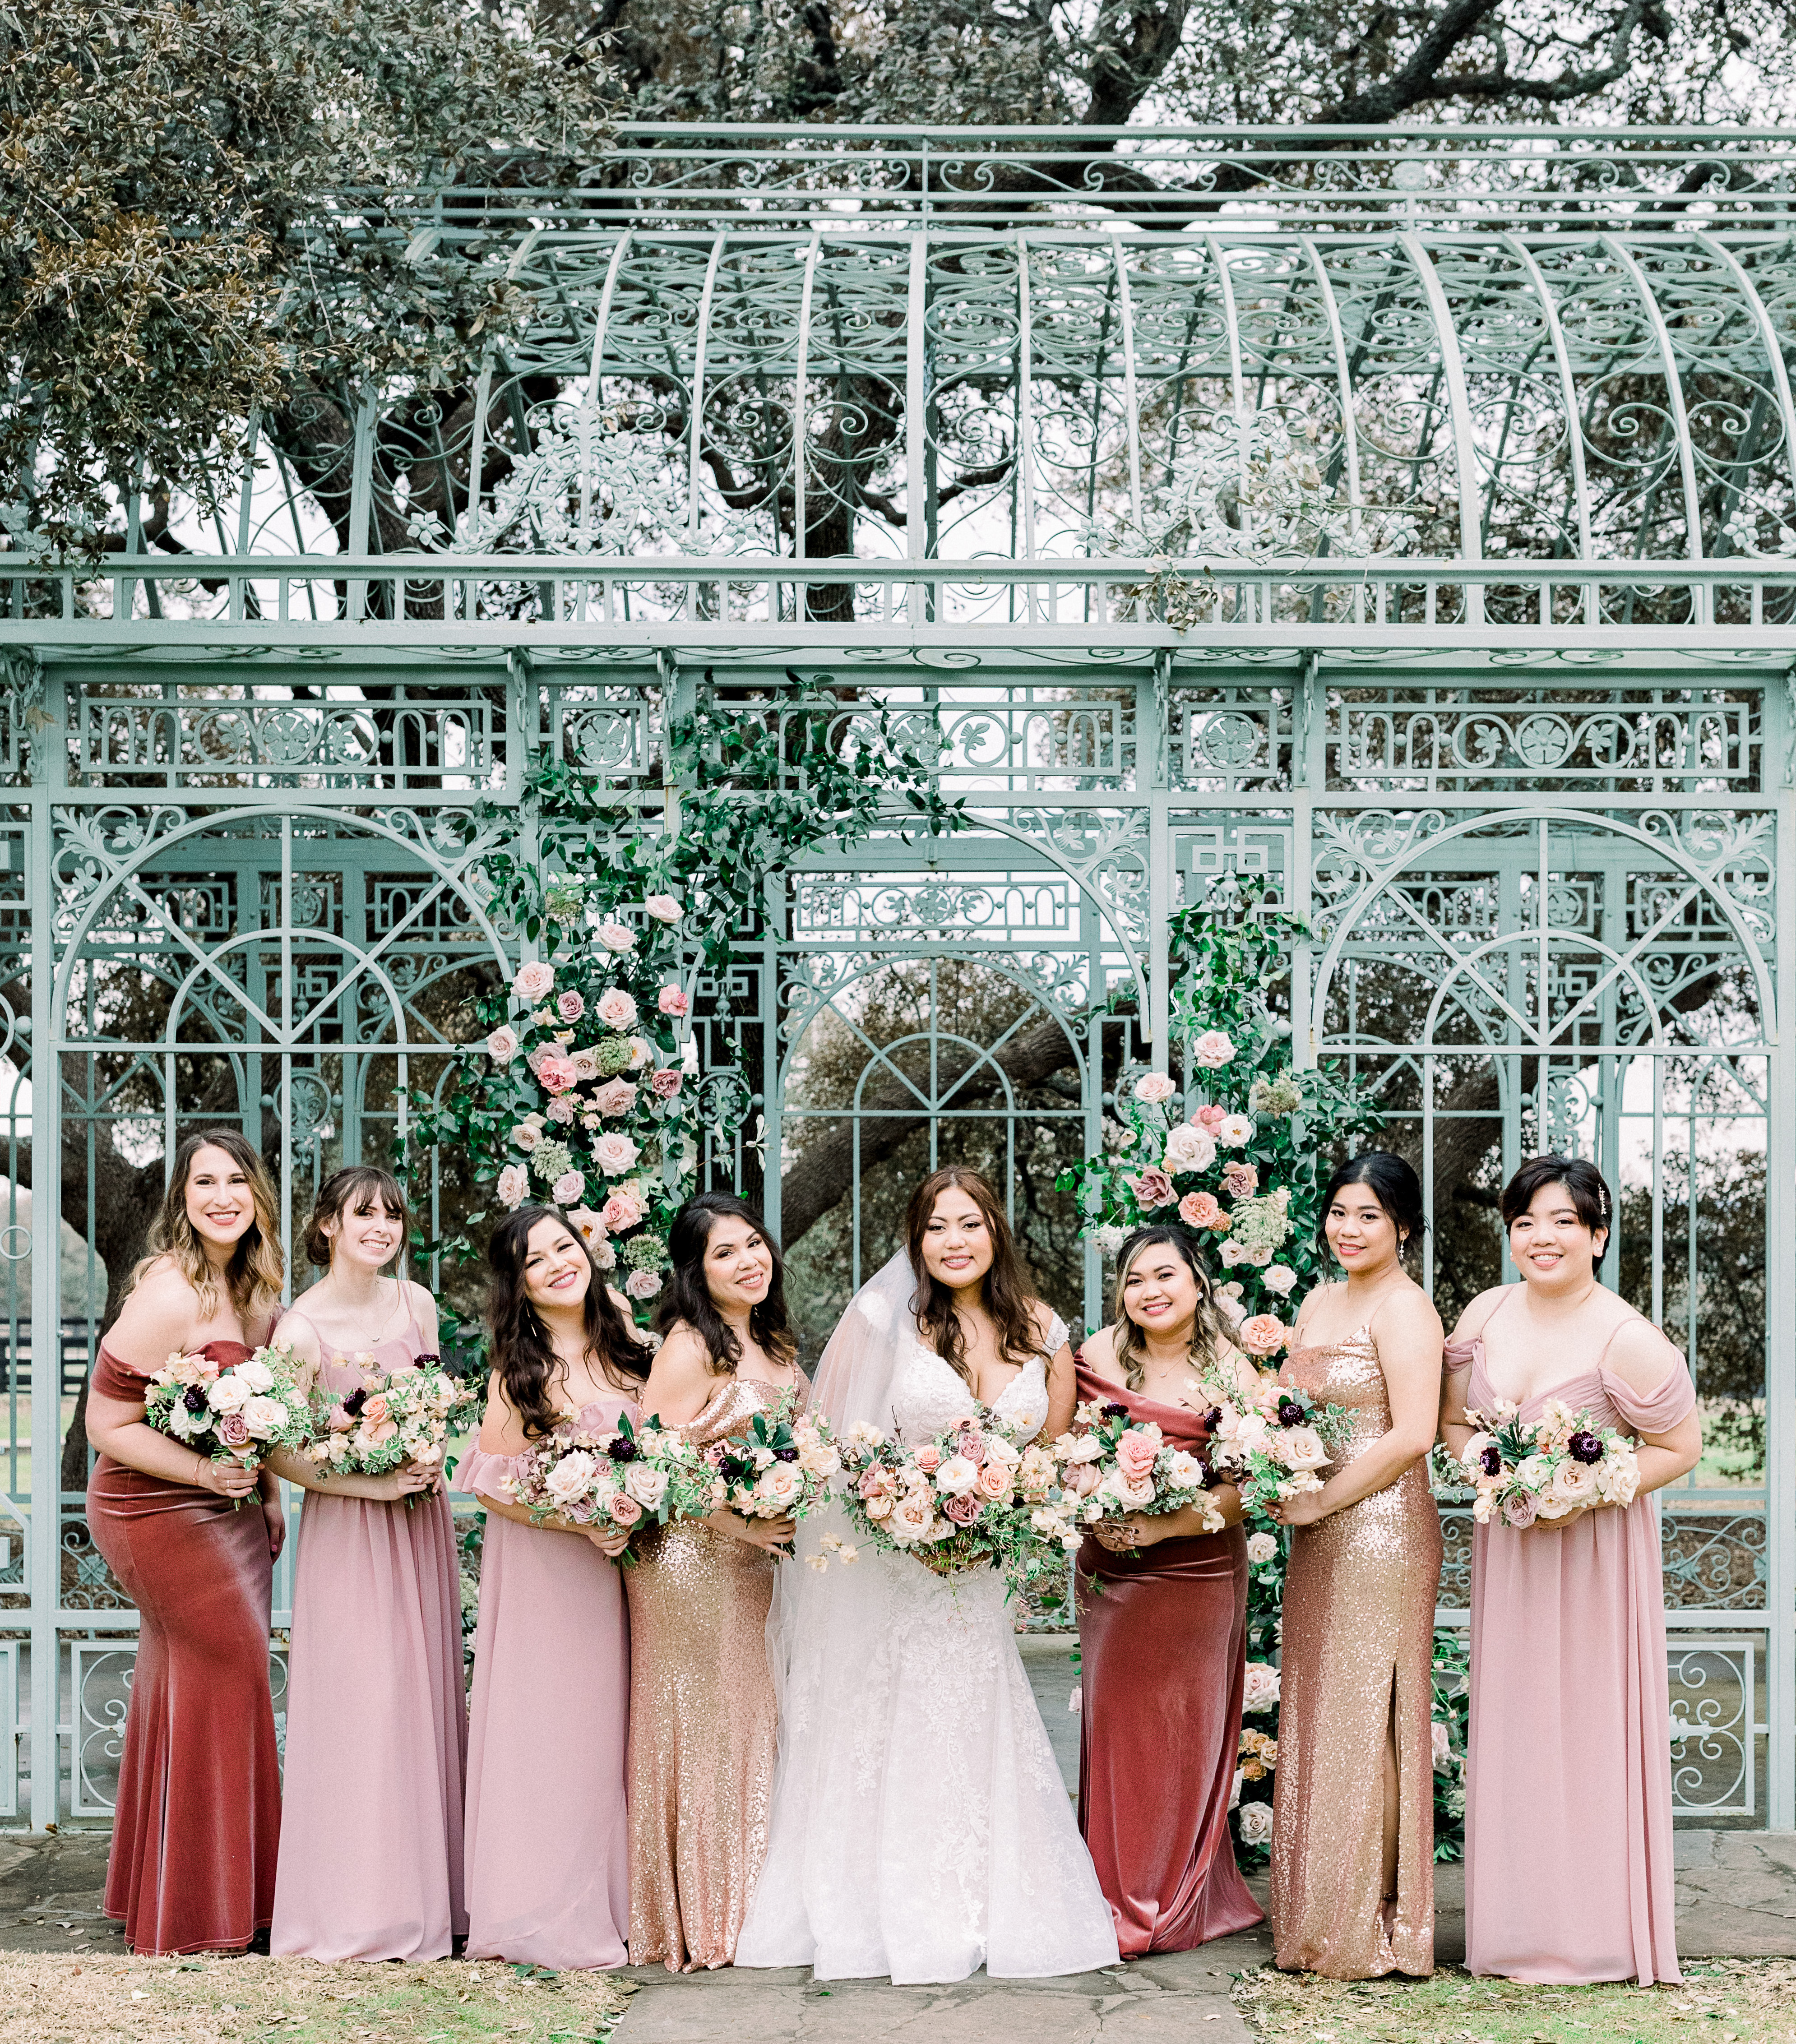 Bride holding bouquet surrounded seven bridesmaids in monochromatic pink, rust and gold dresses in front of an antique french gazebo at hill country wedding venue, Ma Maison.